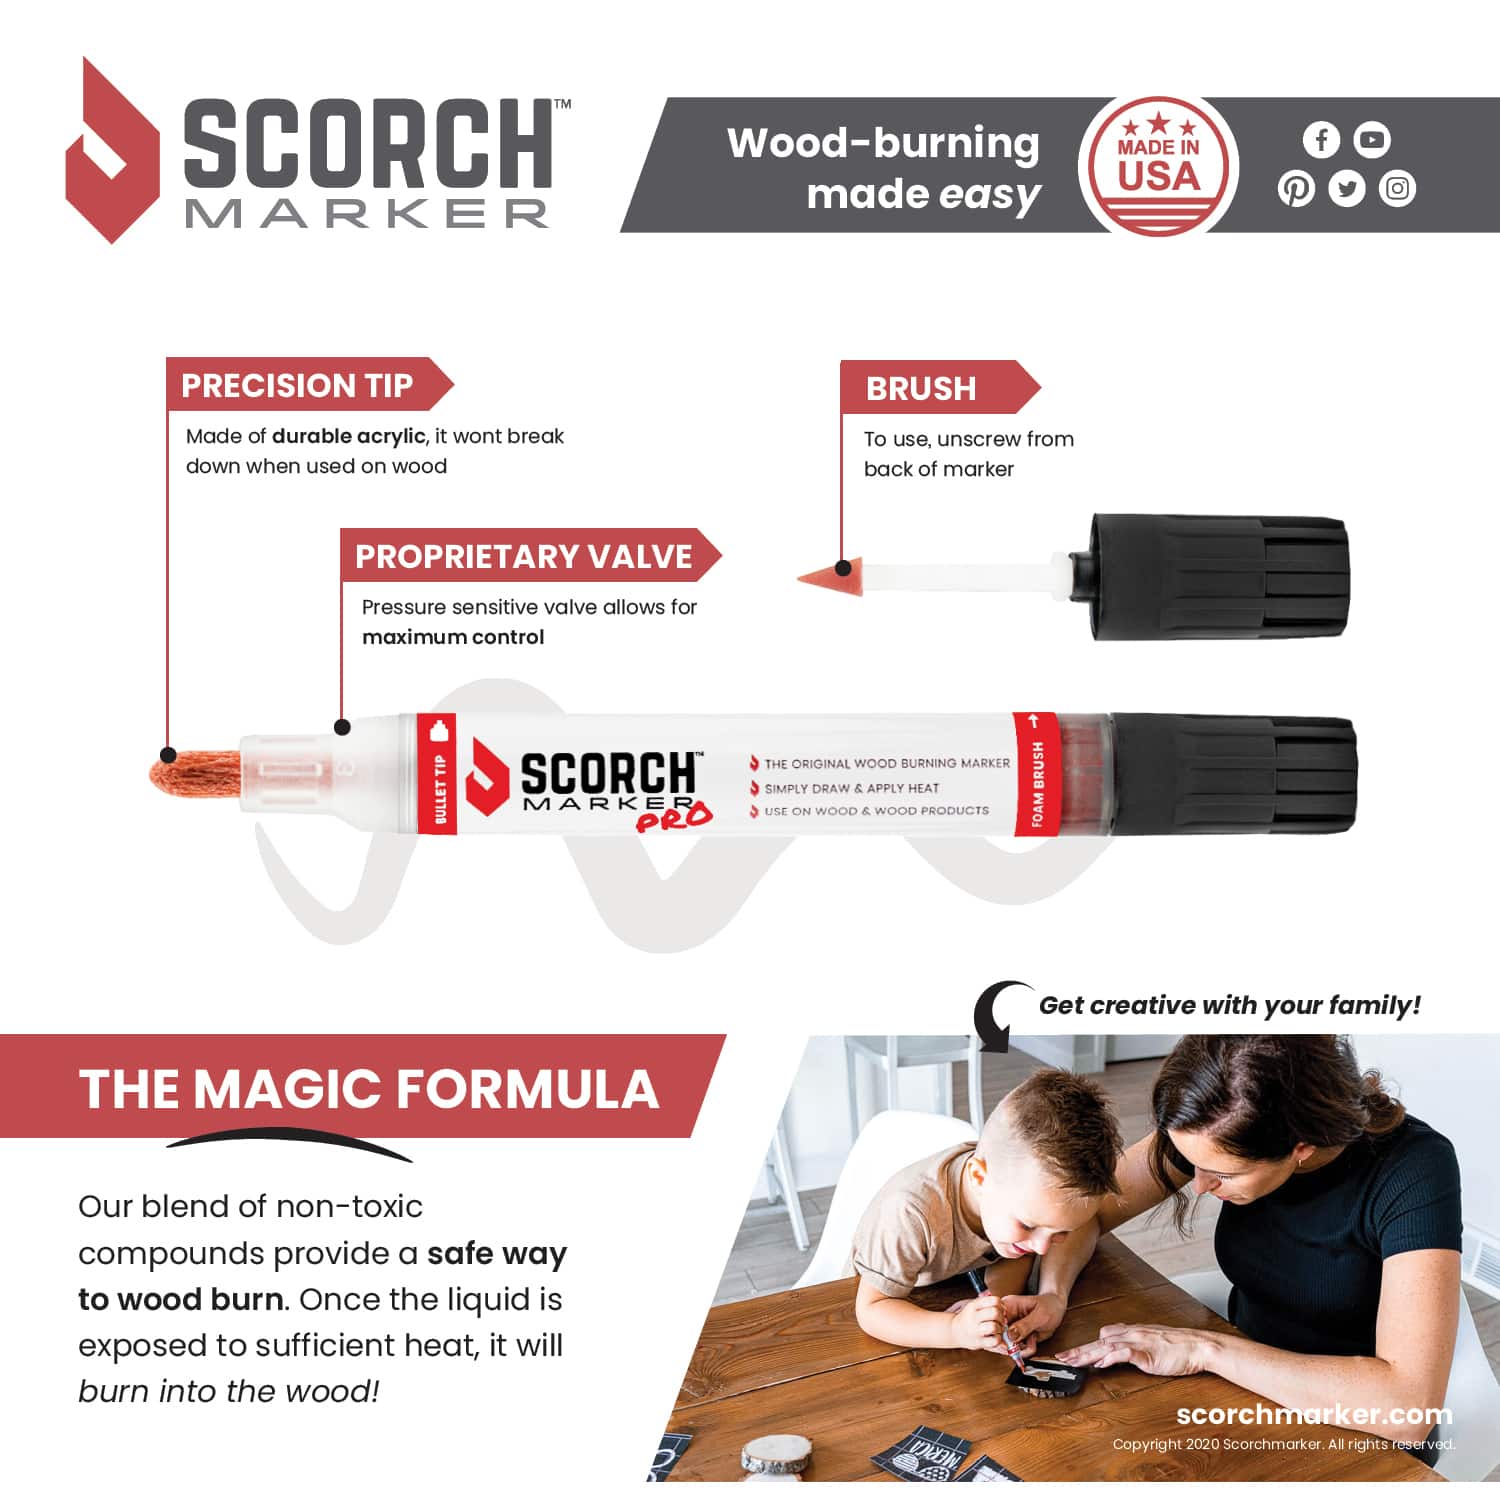 Scorch Marker Wood Finishing Oil - Safe For Cutting Boards